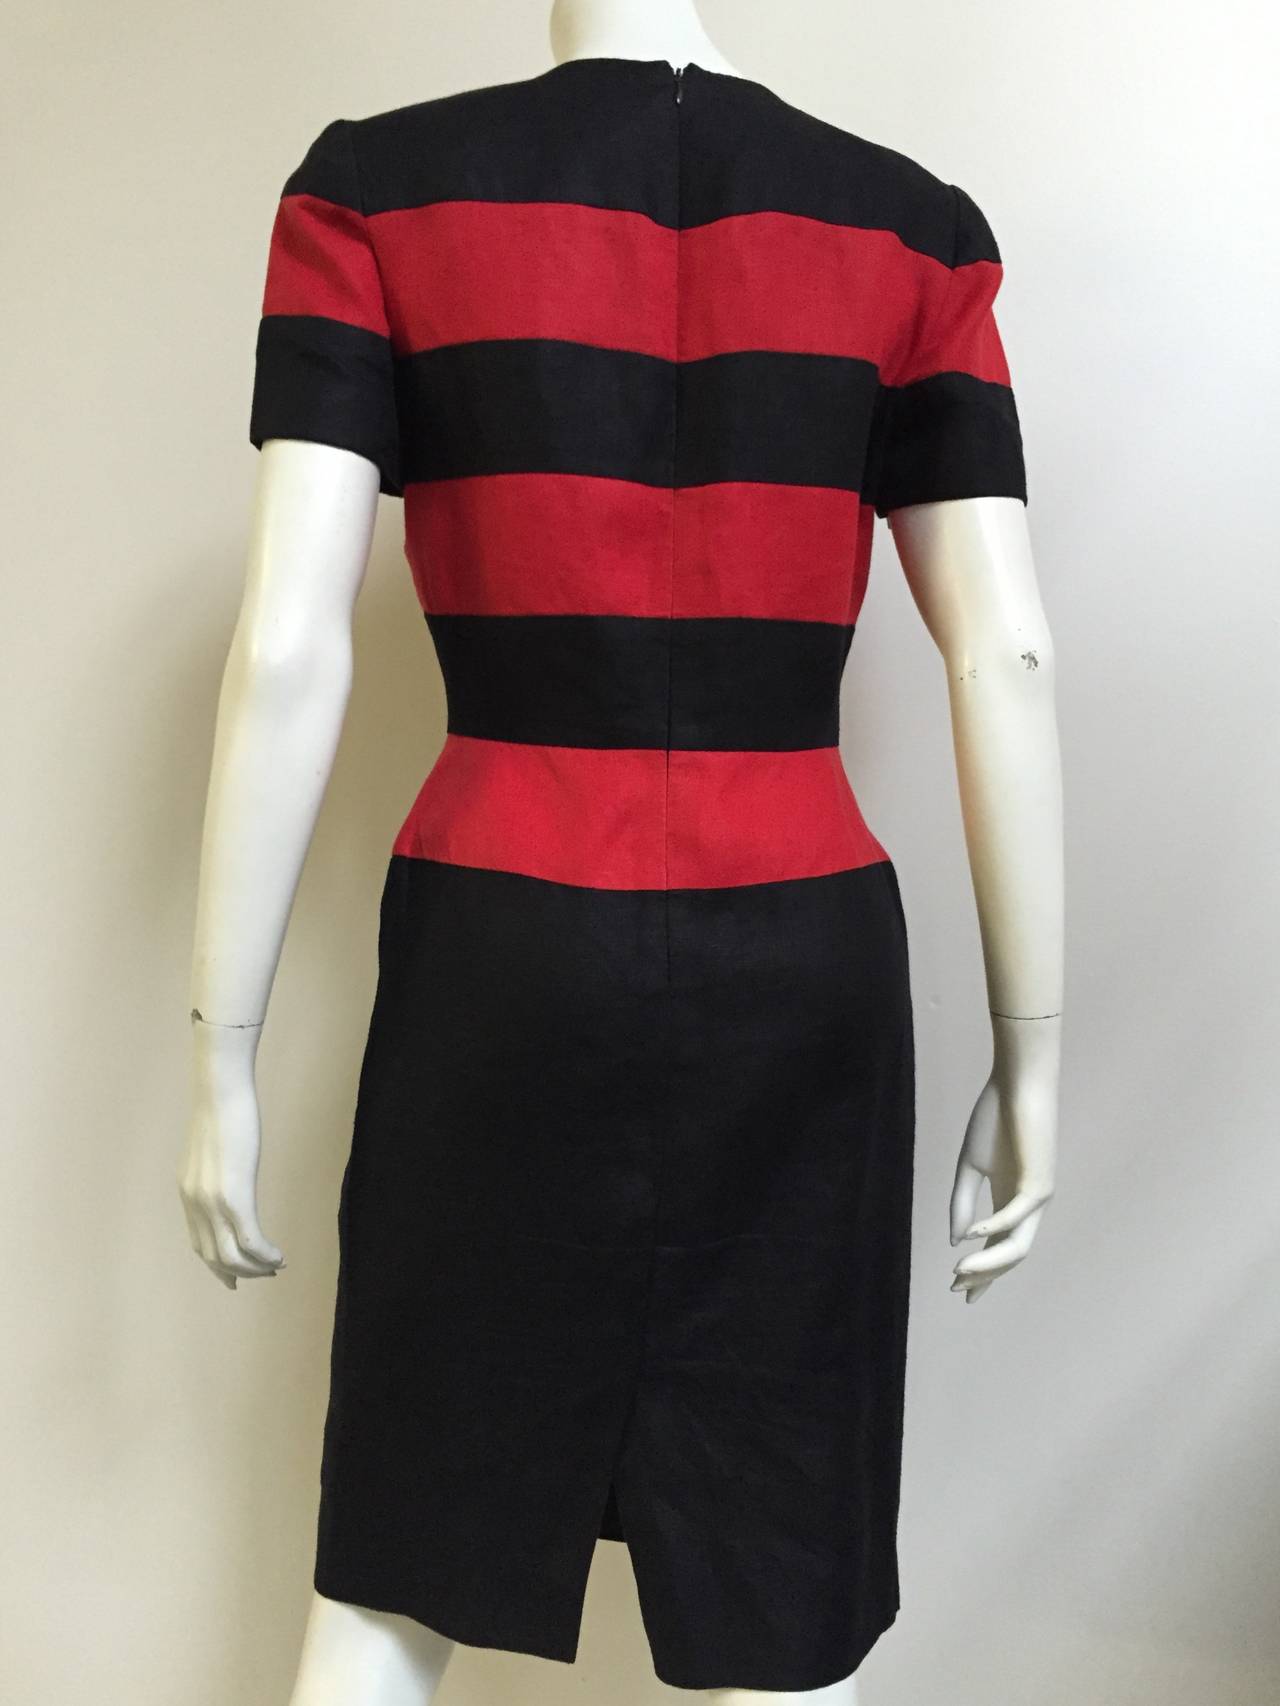 Scaasi Black and Red Linen Striped Sheath Dress, Size 6  For Sale 2